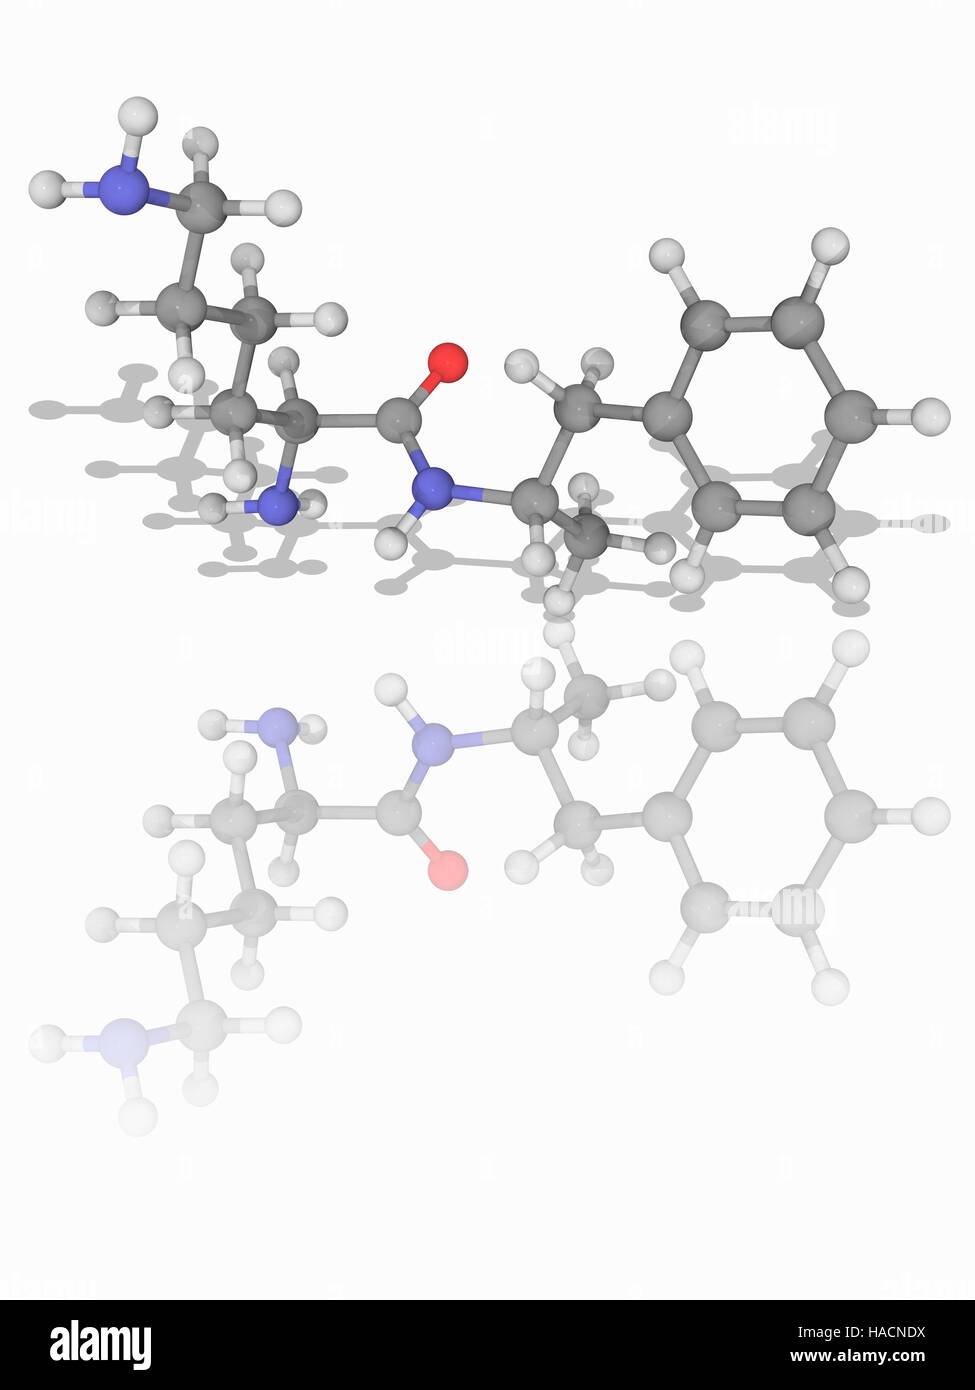 Lisdexamfetamine. Molecular model of the psychostimulant drug lisdexamfetamine (C15.H25.N3.O), also known as lisdexamphetamine. This chemical is a central nervous system stimulant. It acts as a prodrug to dextroamphetamine upon cleavage of the lysine portion of the molecule. Atoms are represented as spheres and are colour-coded: carbon (grey), hydrogen (white), nitrogen (blue) and oxygen (red). Illustration. Stock Photo